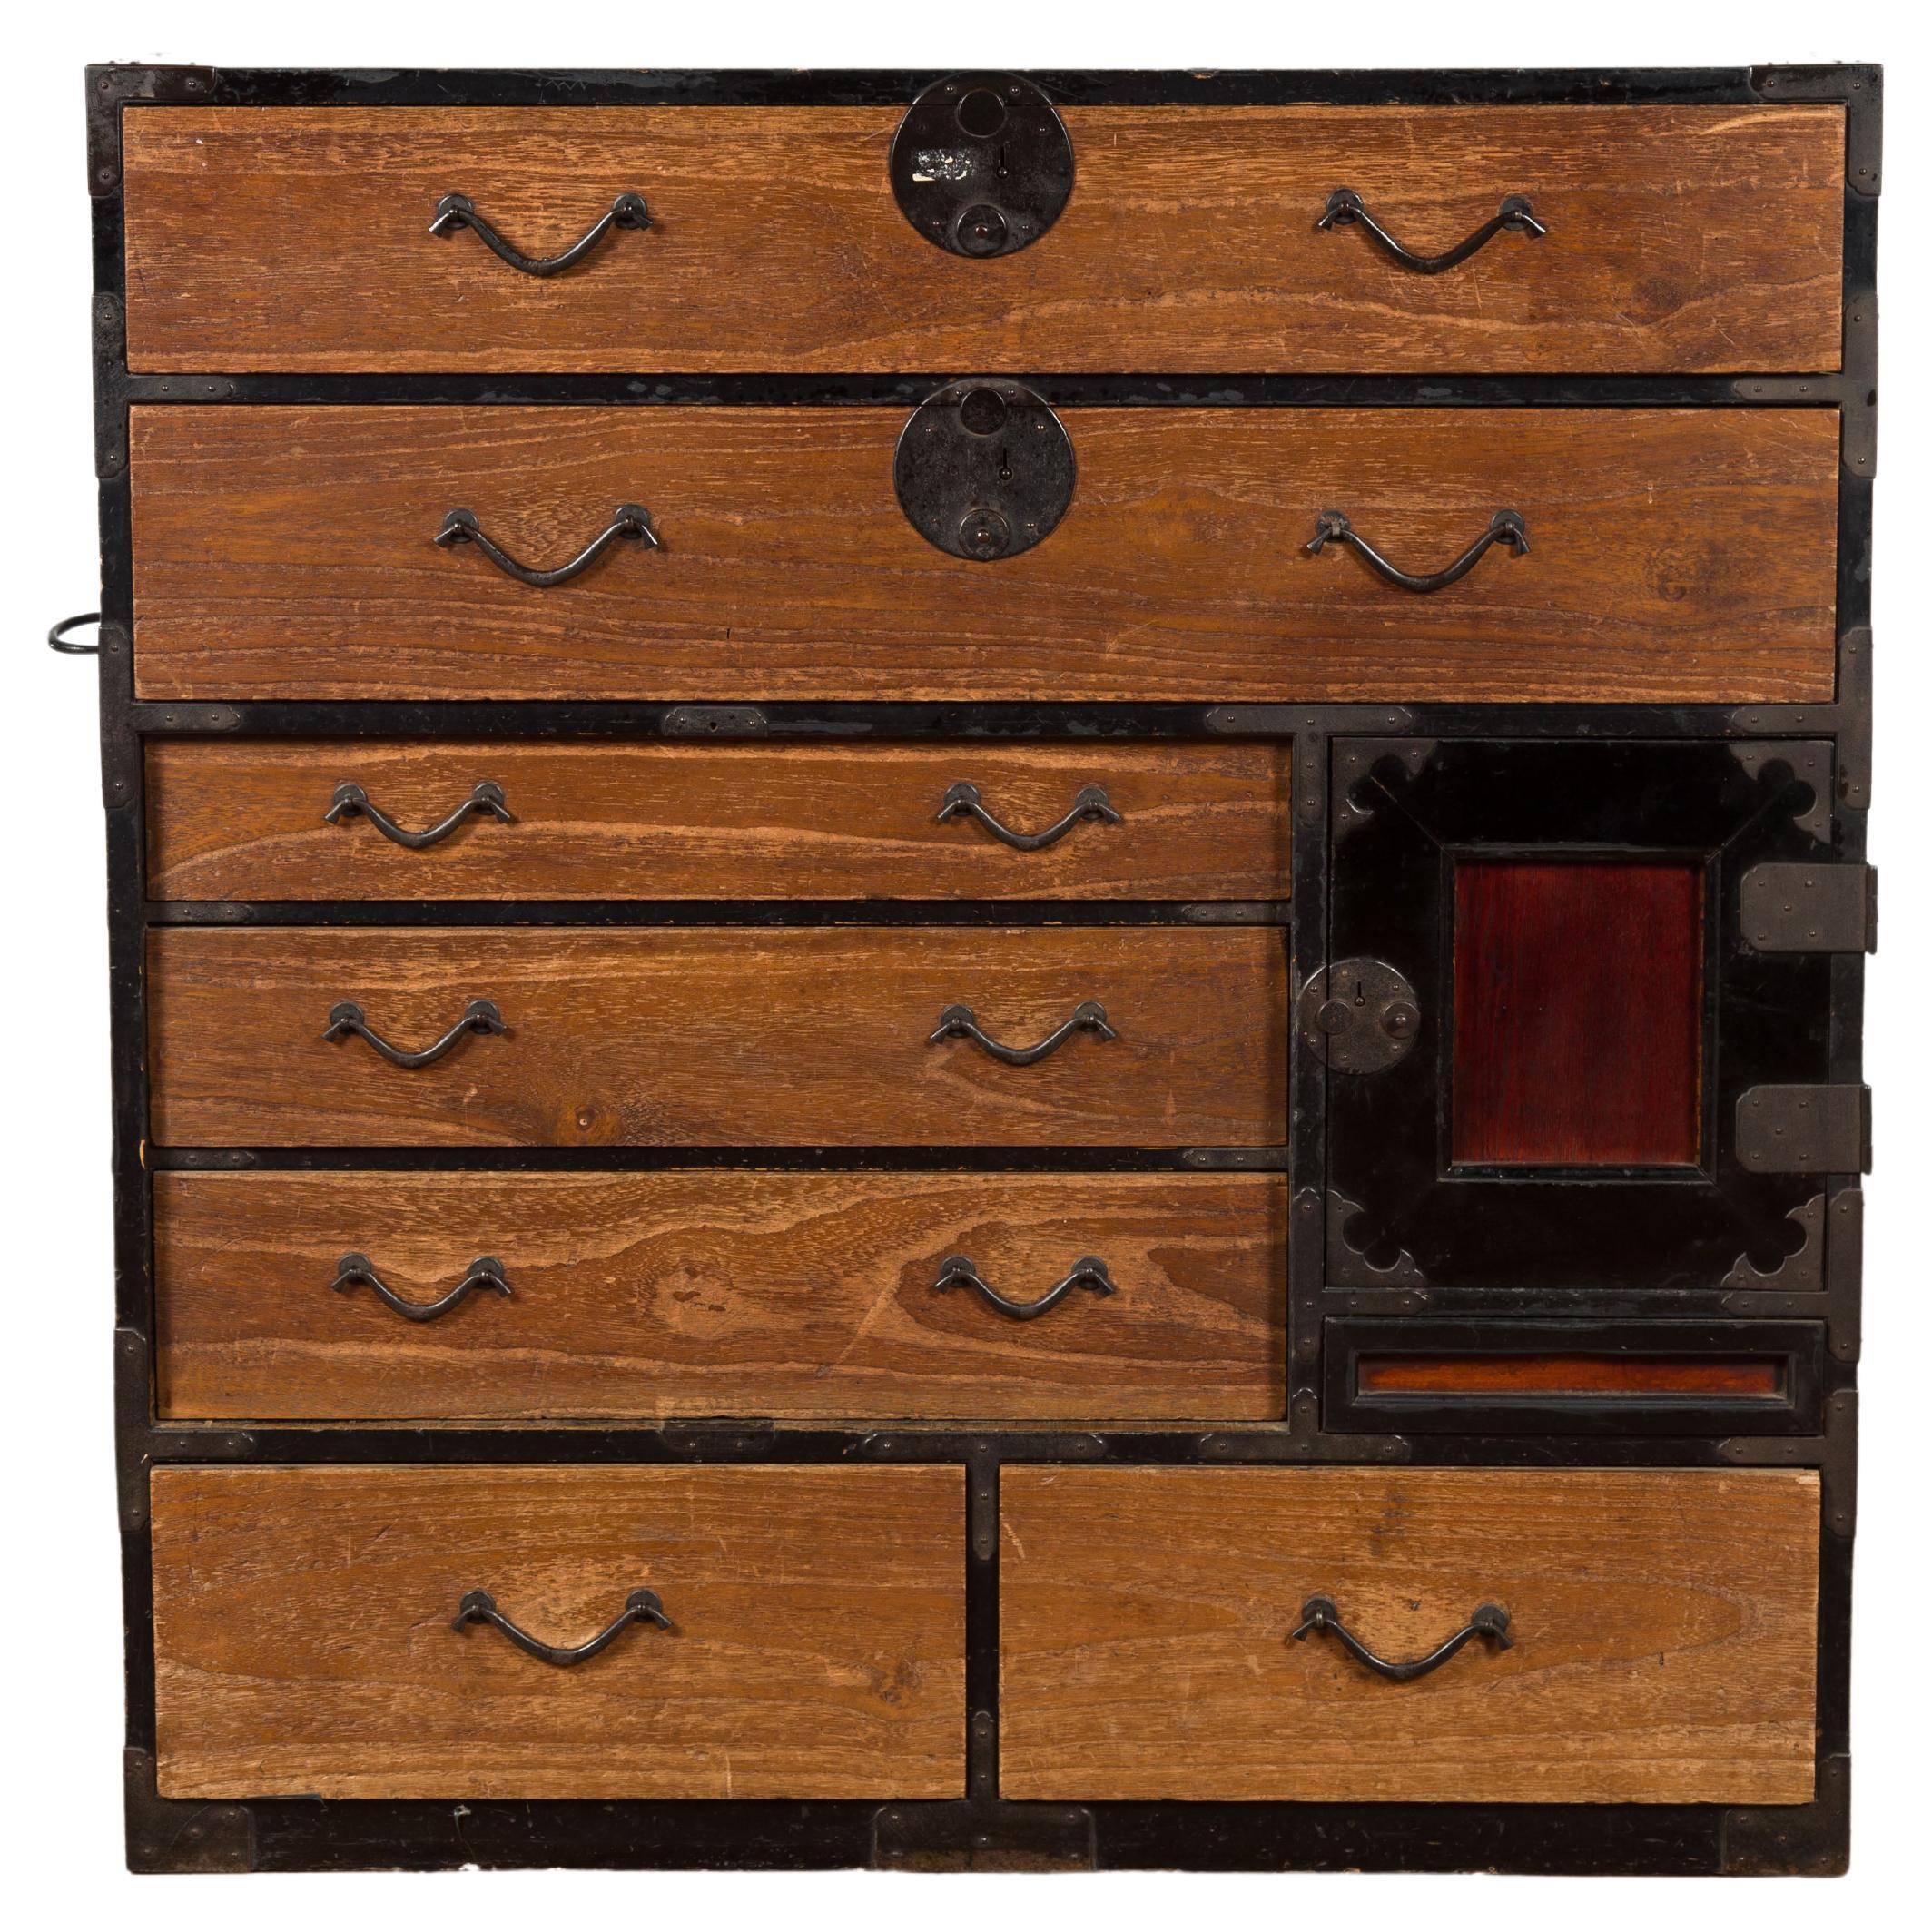 An antique Japanese Meiji period tansu clothing chest from the 19th century, with black and brown patina. Created in Japan during the 19th century, this tansu chest features a rectangular top sitting above seven drawers surrounding a side door